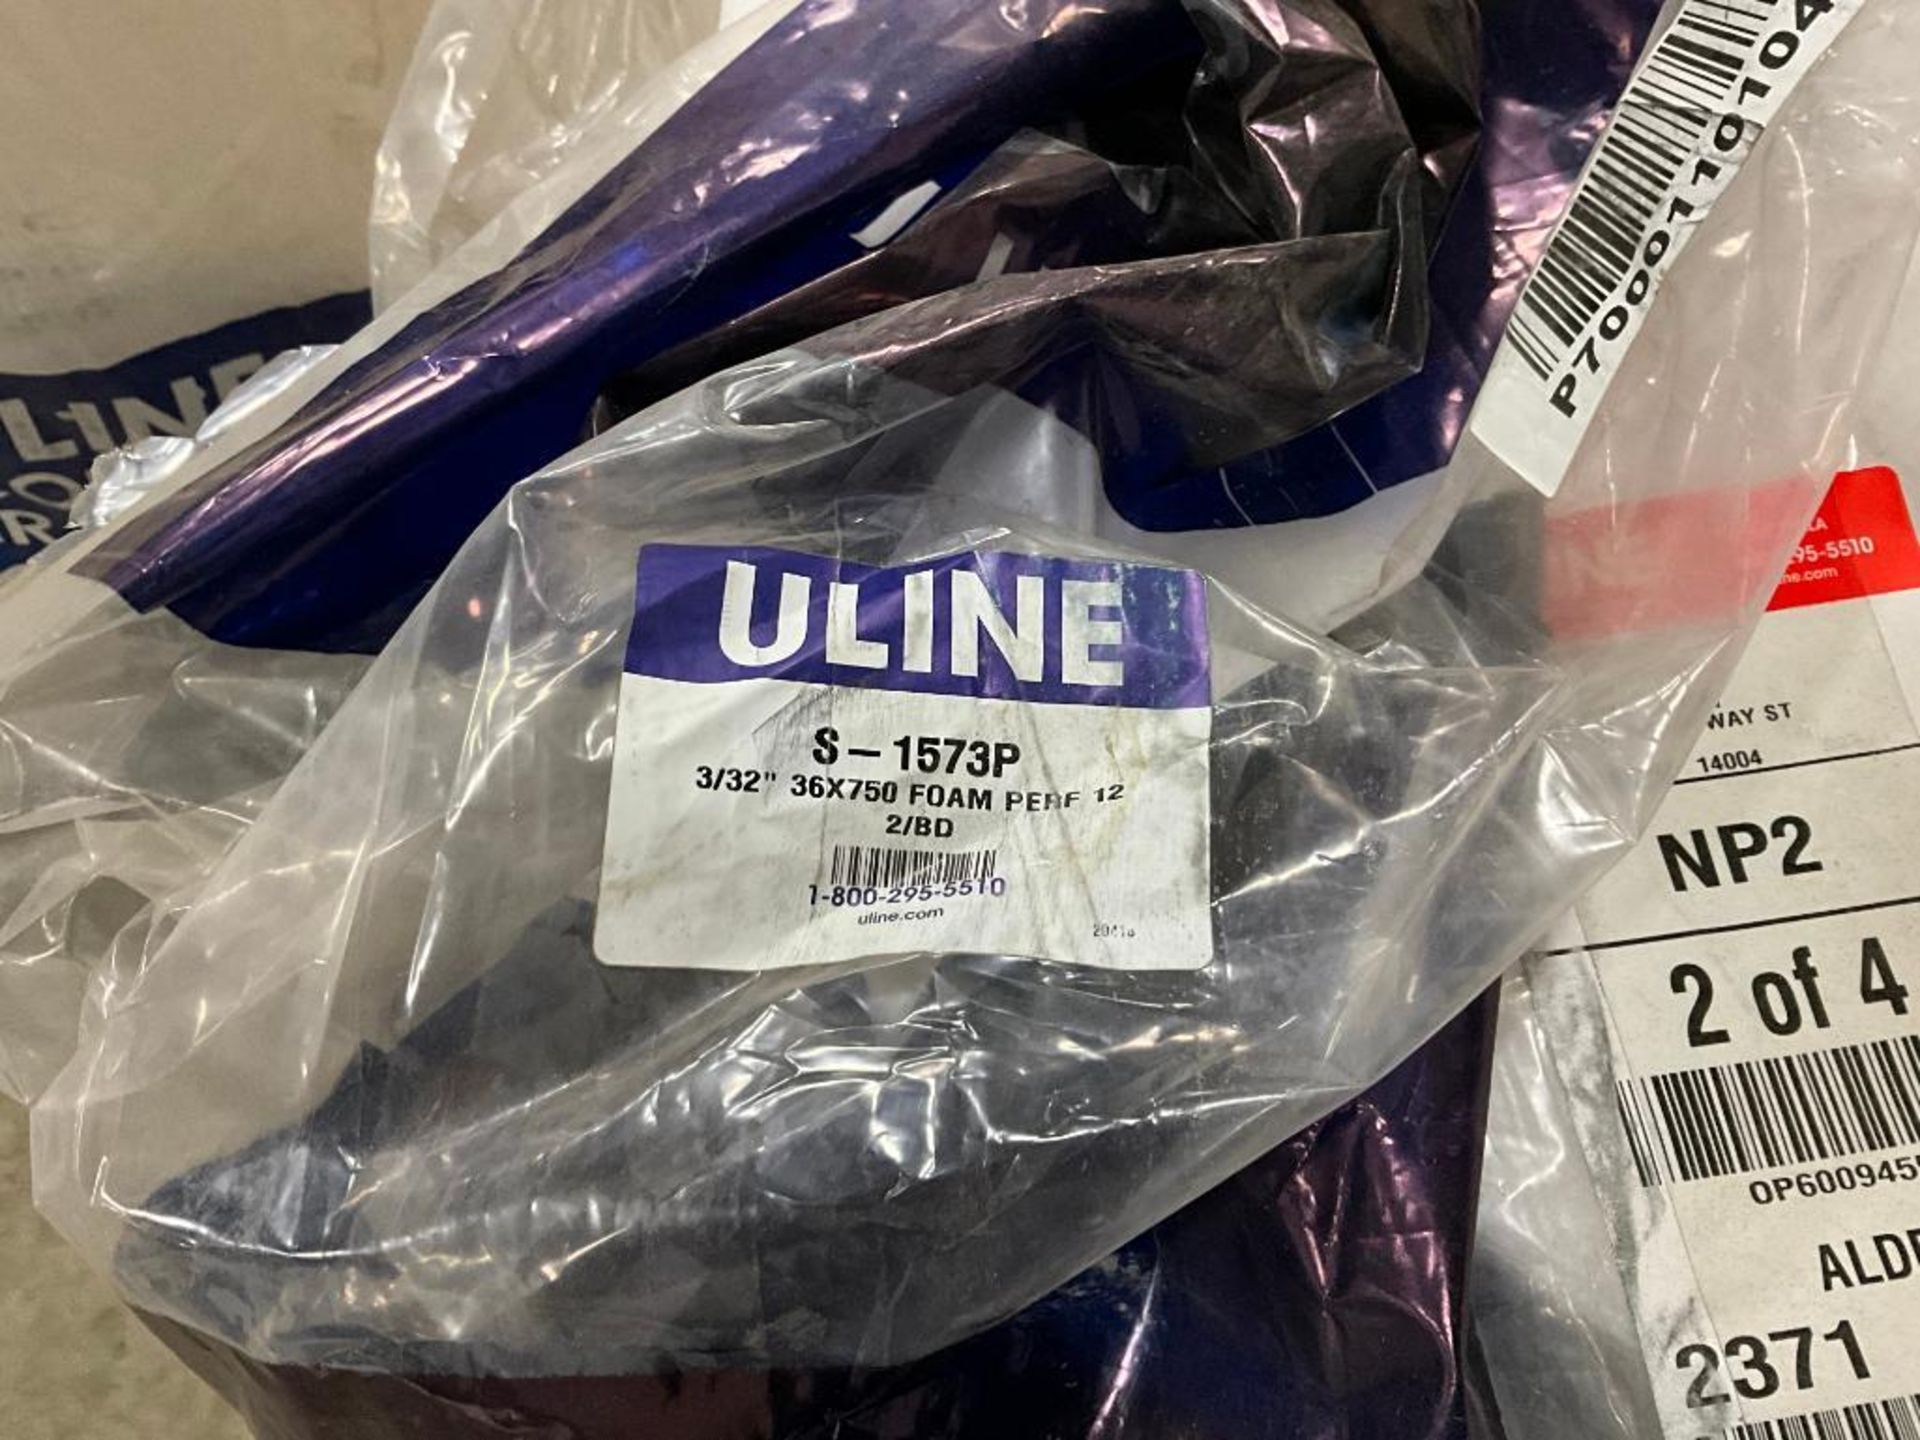 Uline Economy Air Bubble Wrap, 3/16" x 48" x 750', Perfed 12", (2) Rolls in 48" BDL, 1/2 Roll Uline - Image 6 of 16